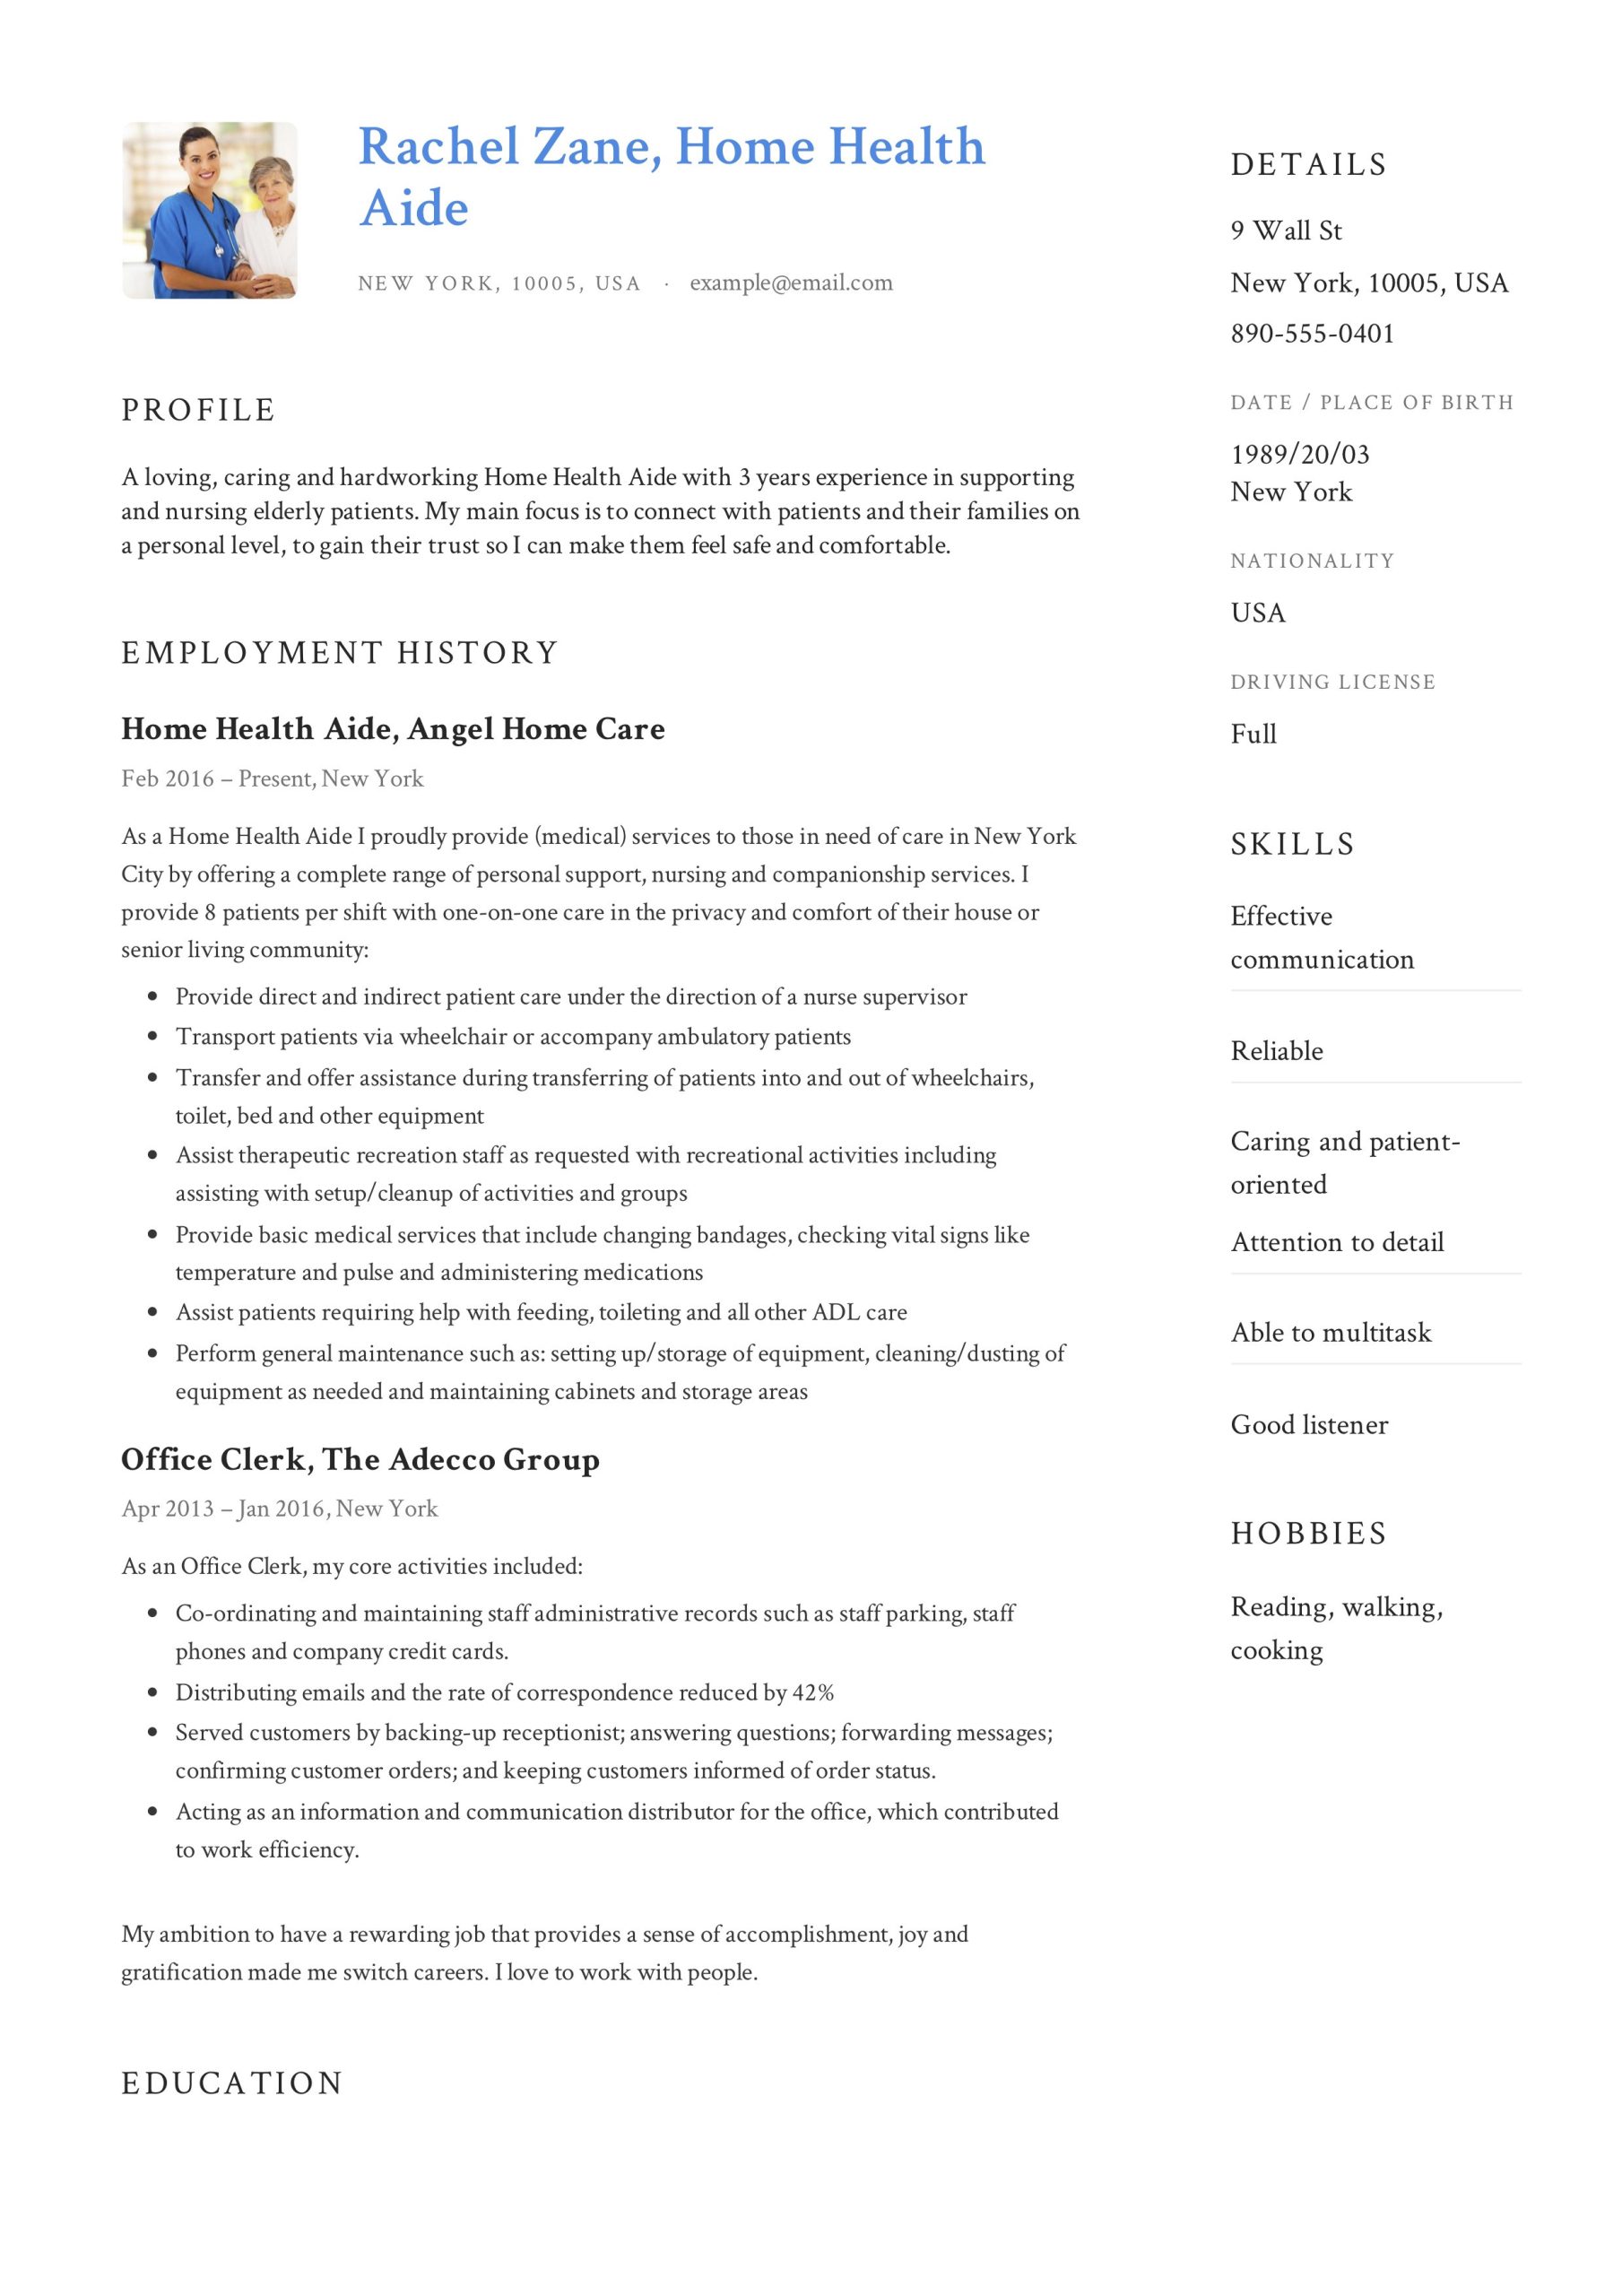 Sample Resume for New Home Health Aide Home Health Aide Resume Guide 12 Examples Pdf